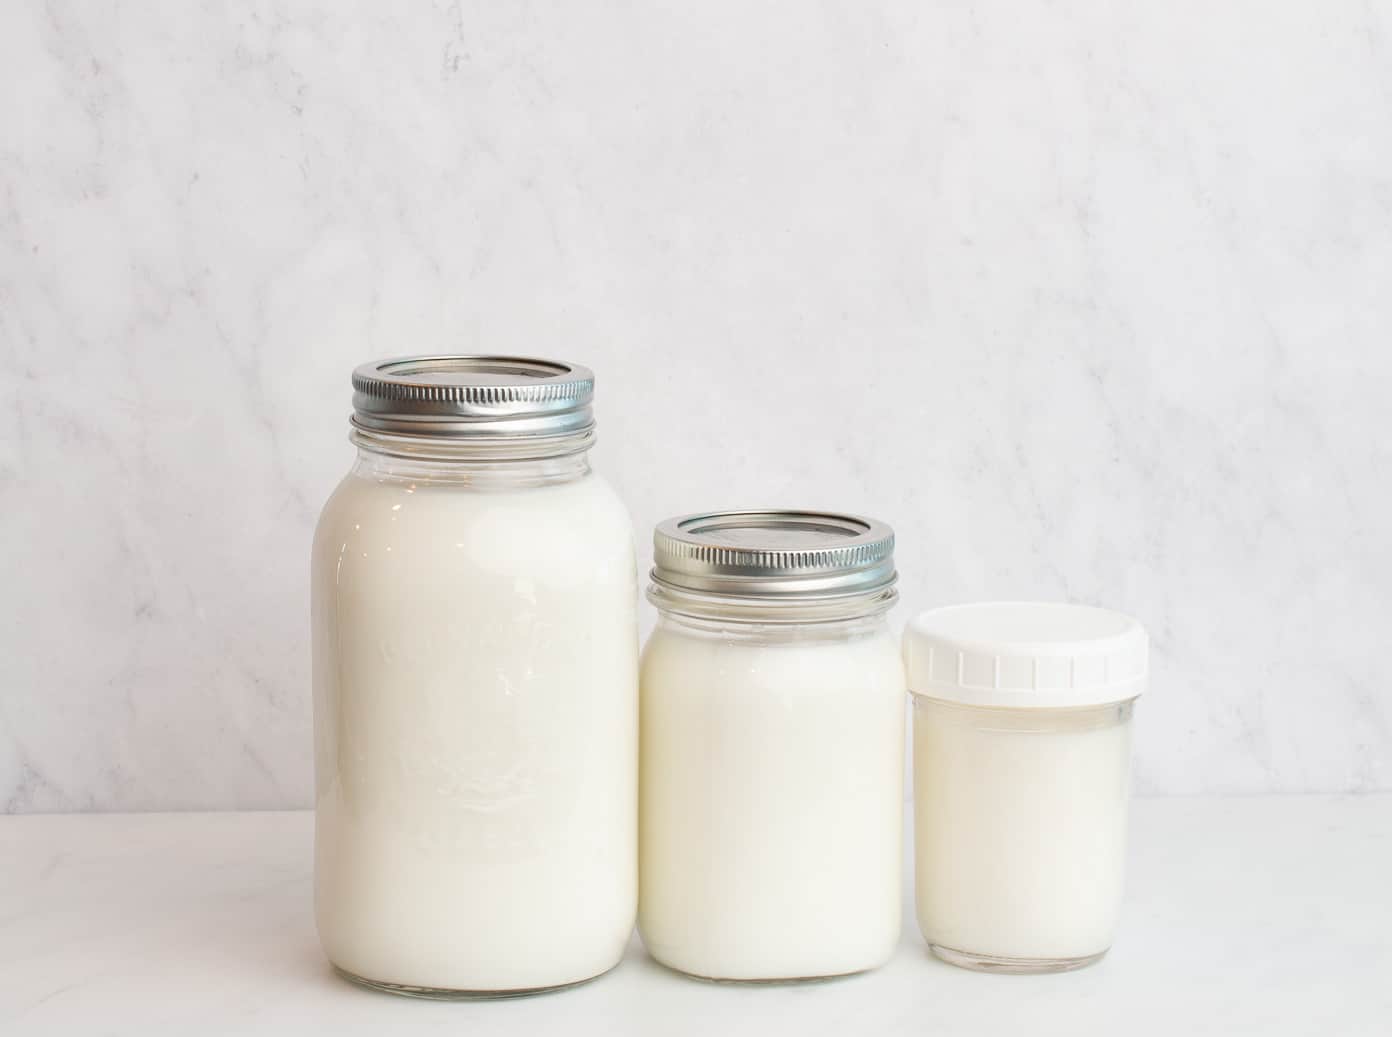 3 mason jars in various sizes lined up on a white counter and a marble background.